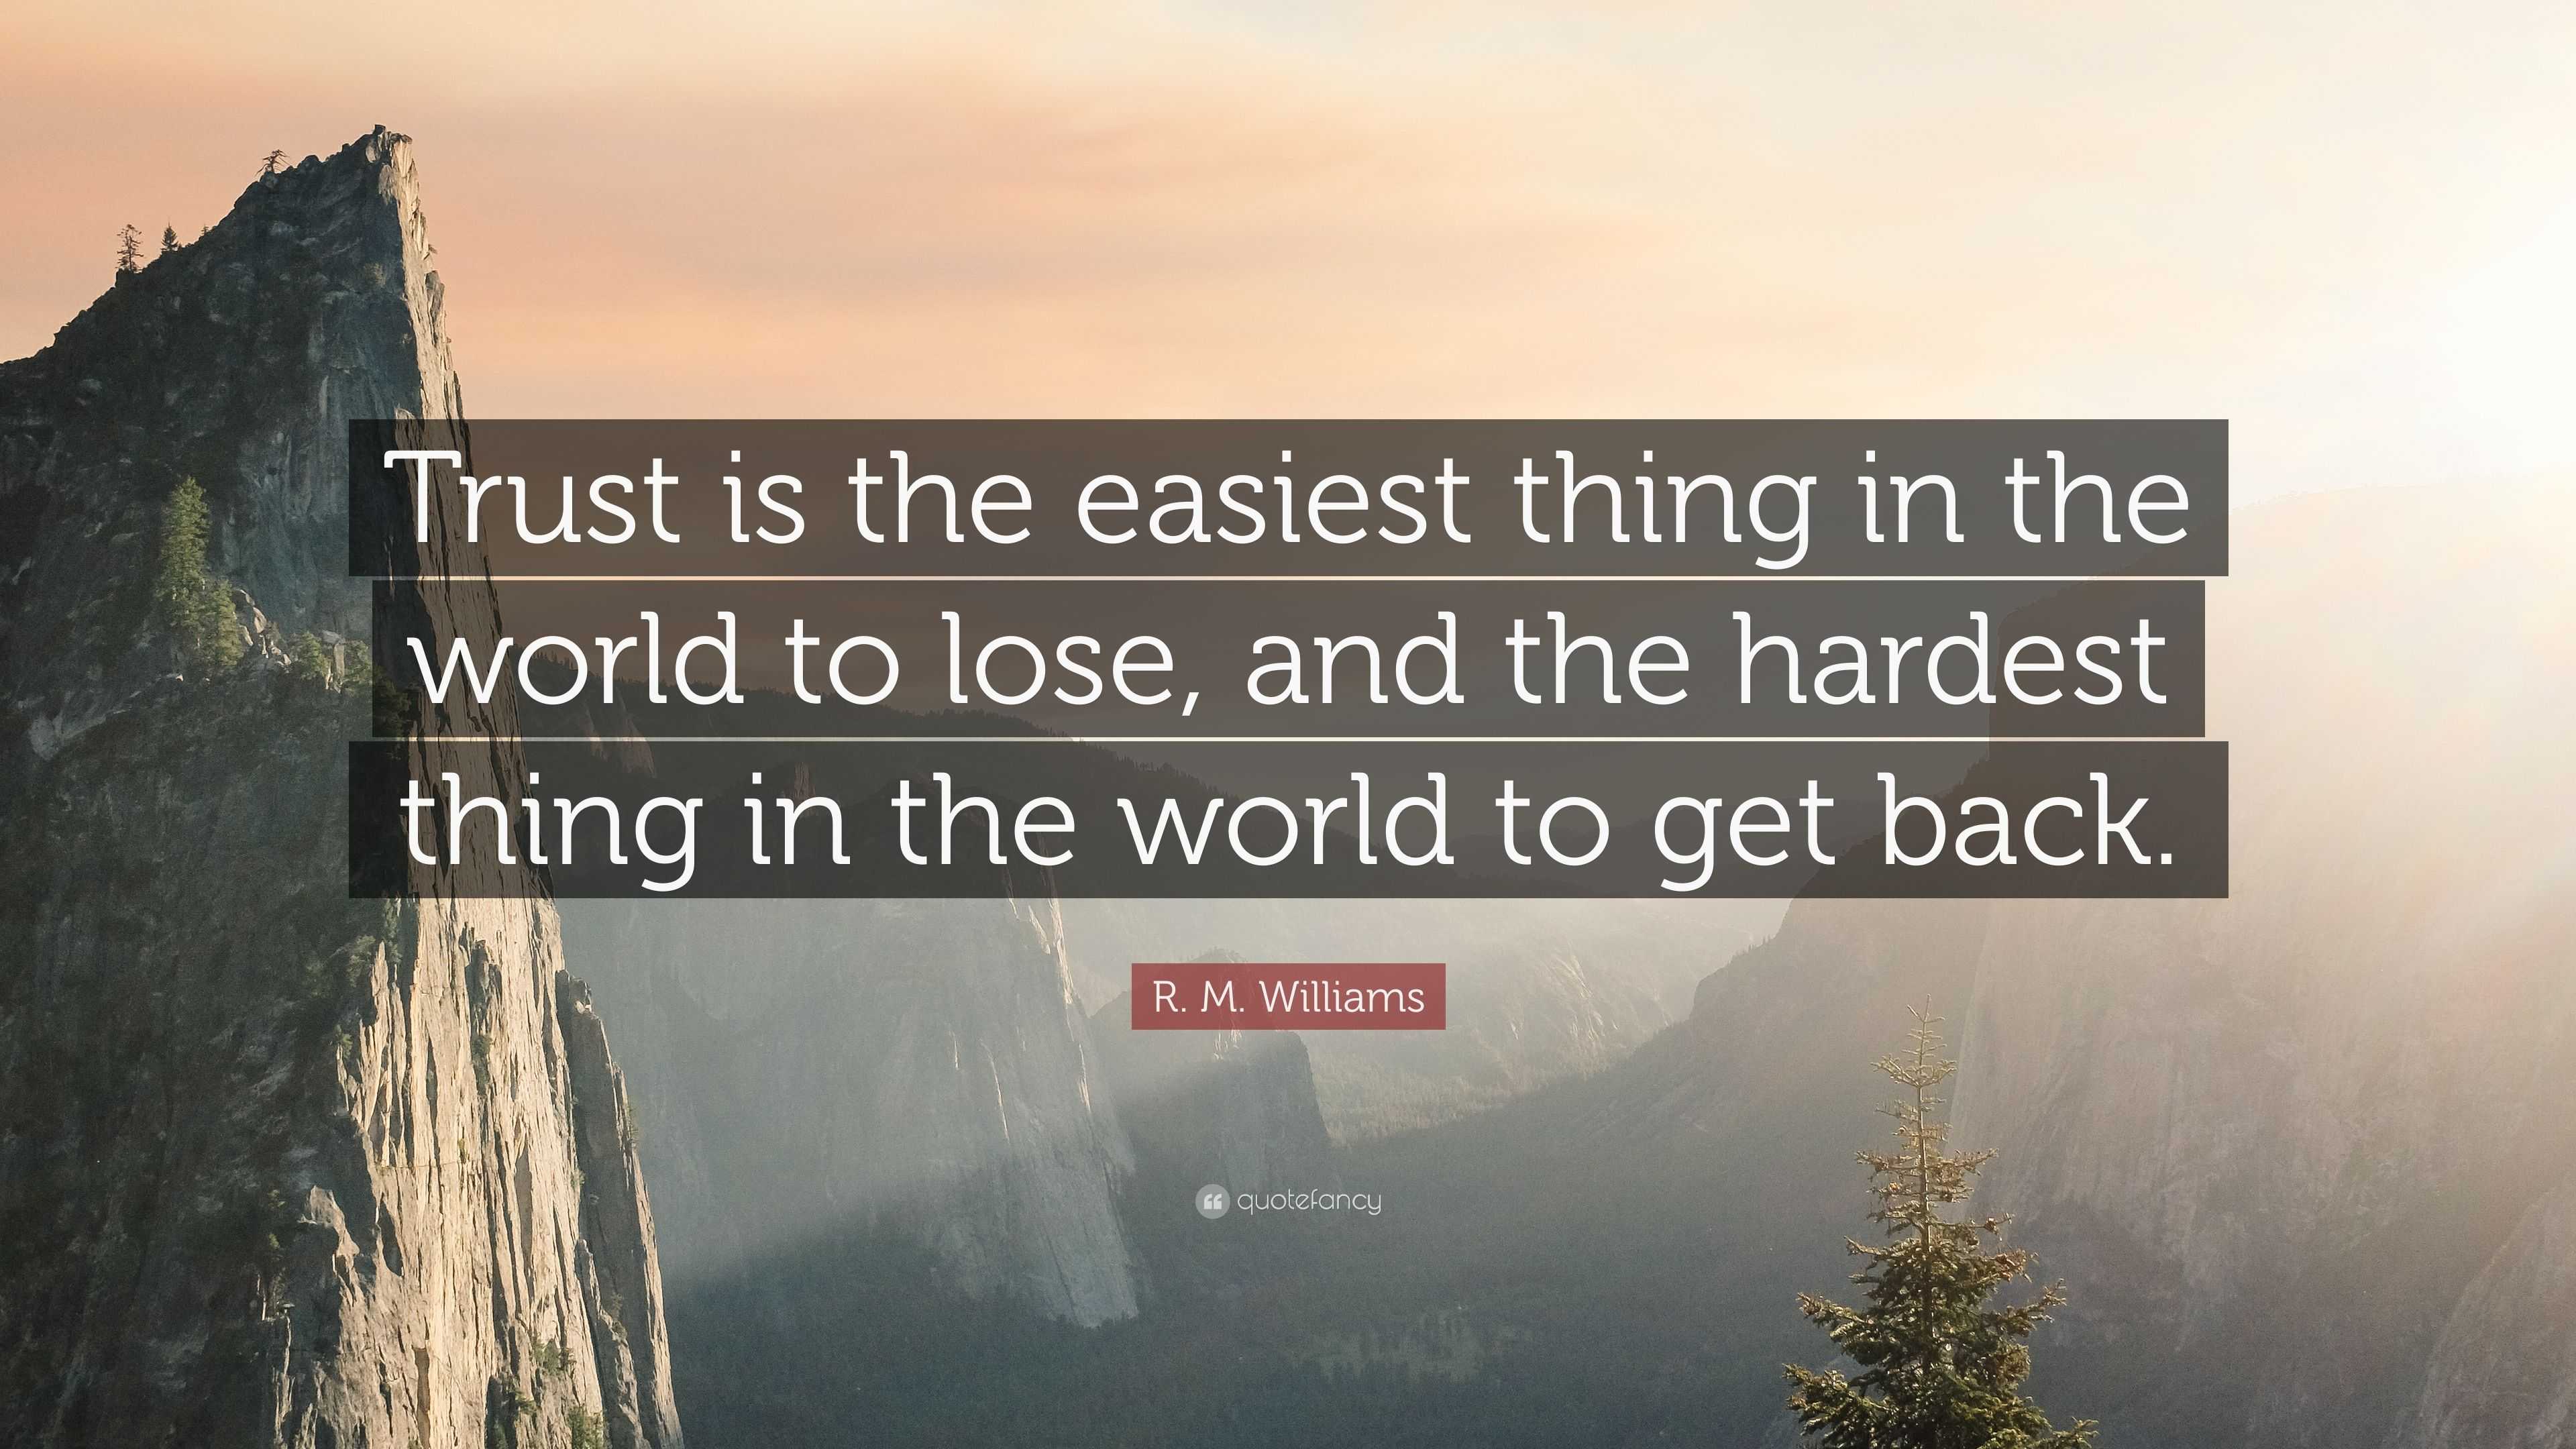 what is the easiest thing in the world